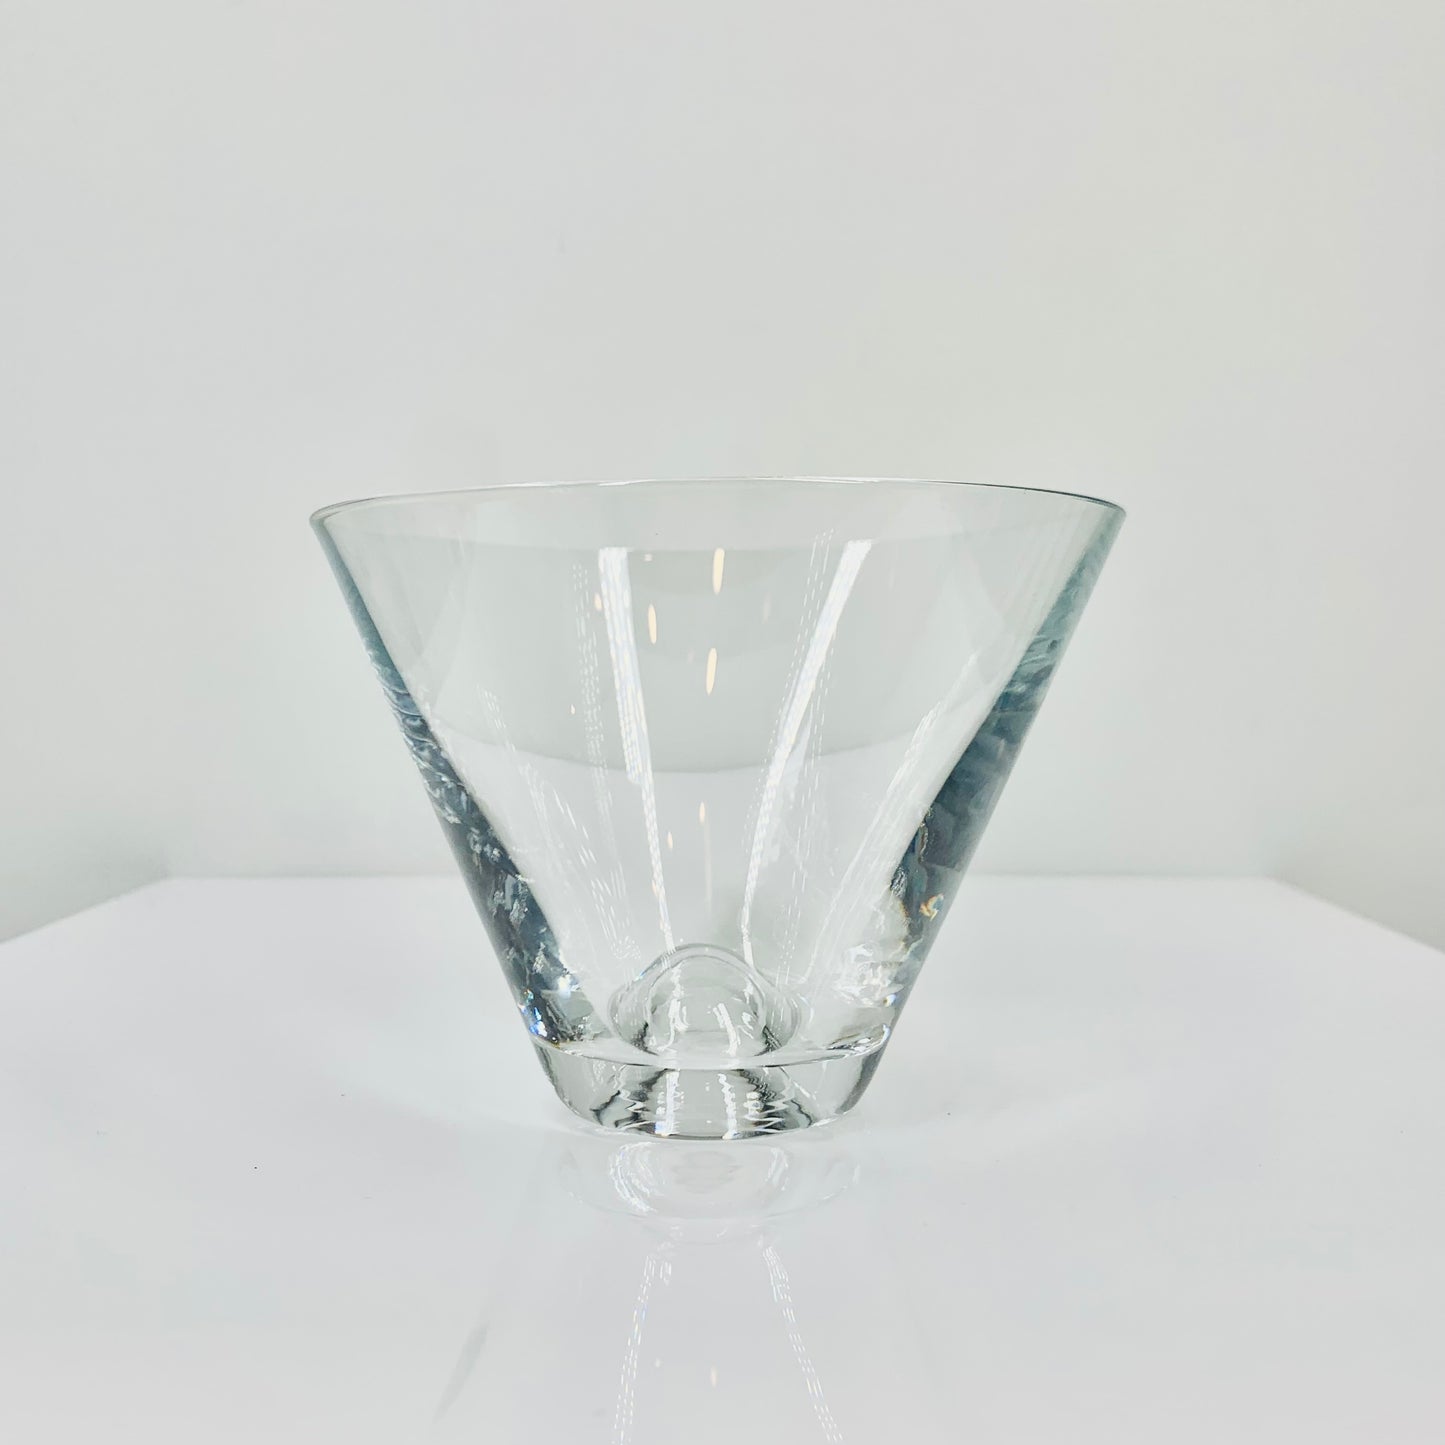 1980s Krosno Poland clear glass bowl with control bubble base